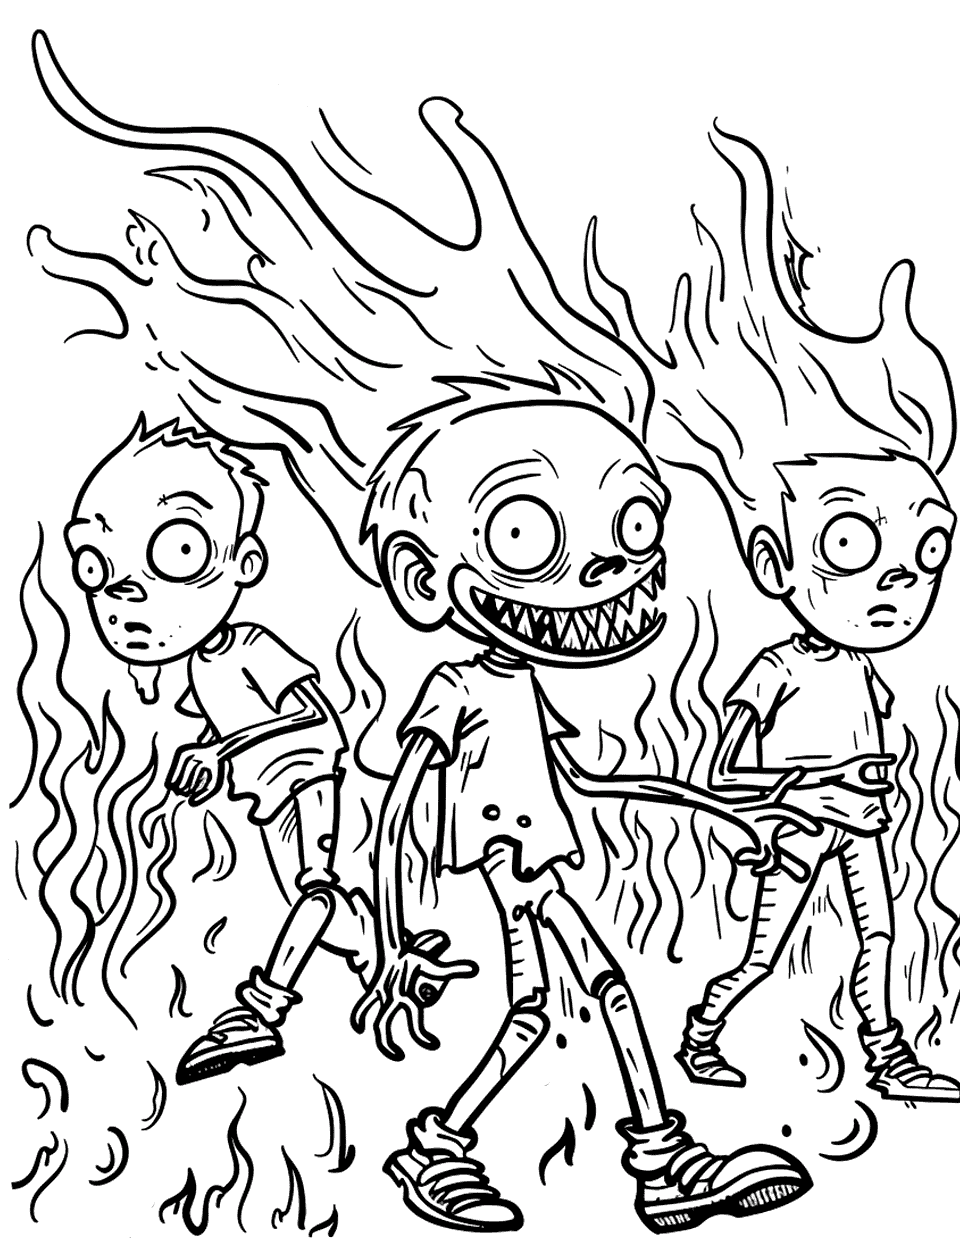 Fire Zombies Zombie Coloring Page - Zombies walking in fire, unaffected by the flames.